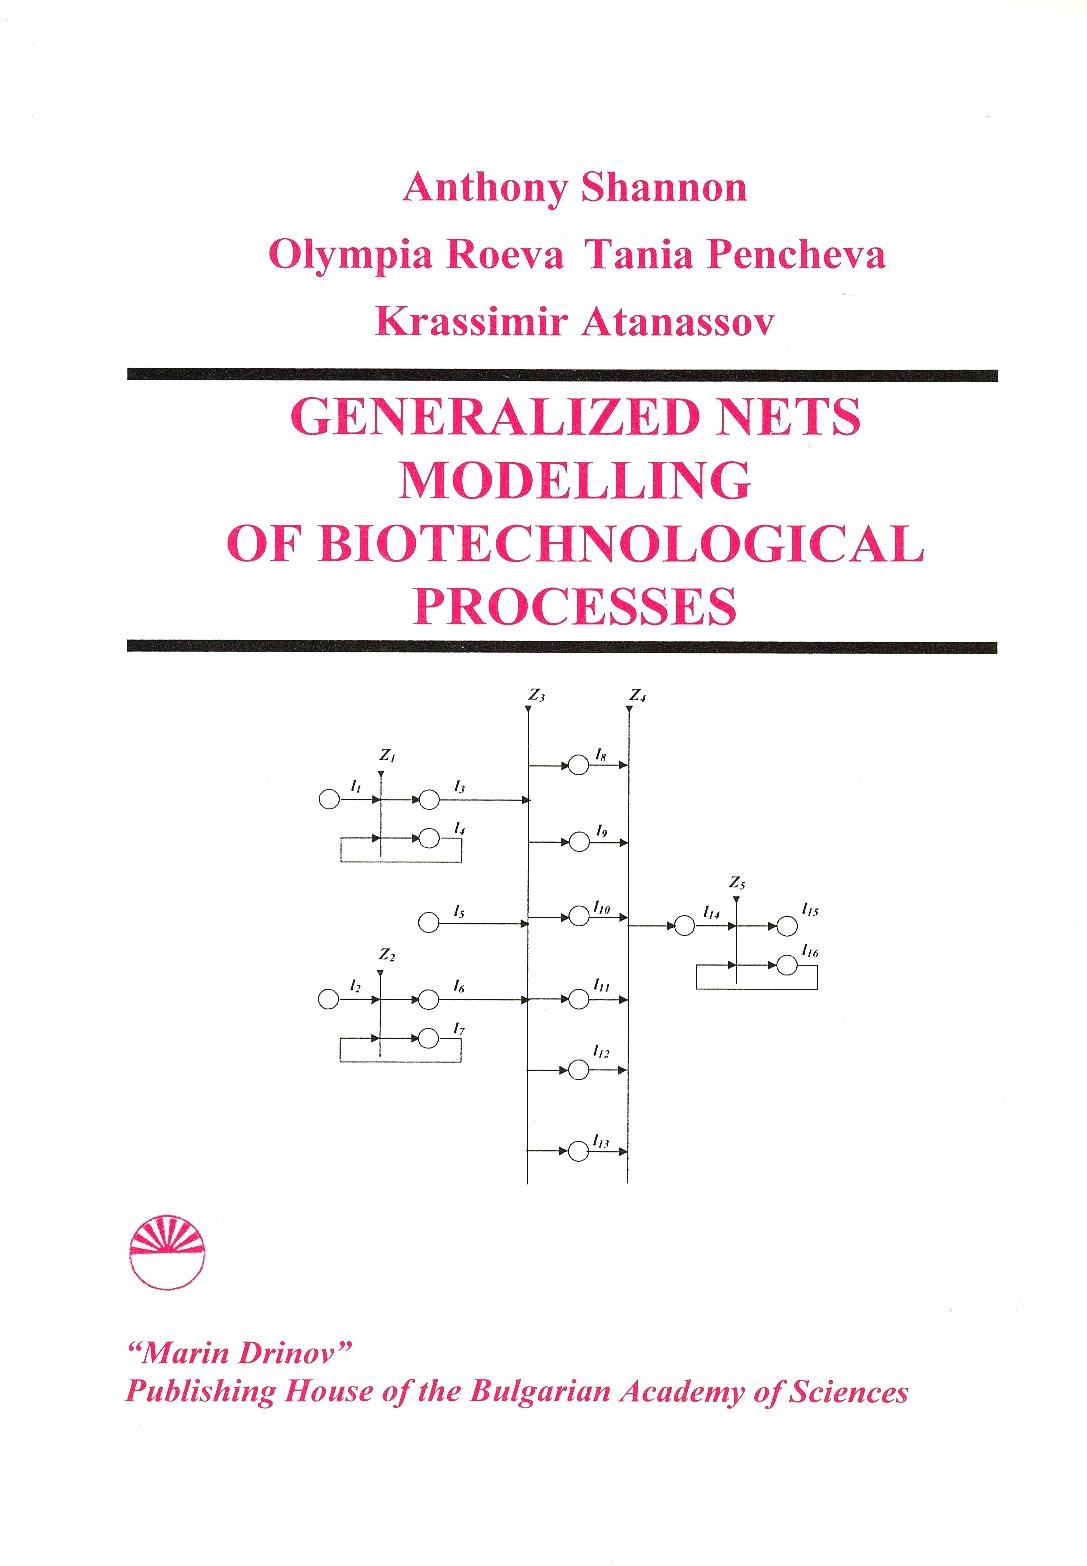 Generalized Nets Modelling of Biotechnological Processes